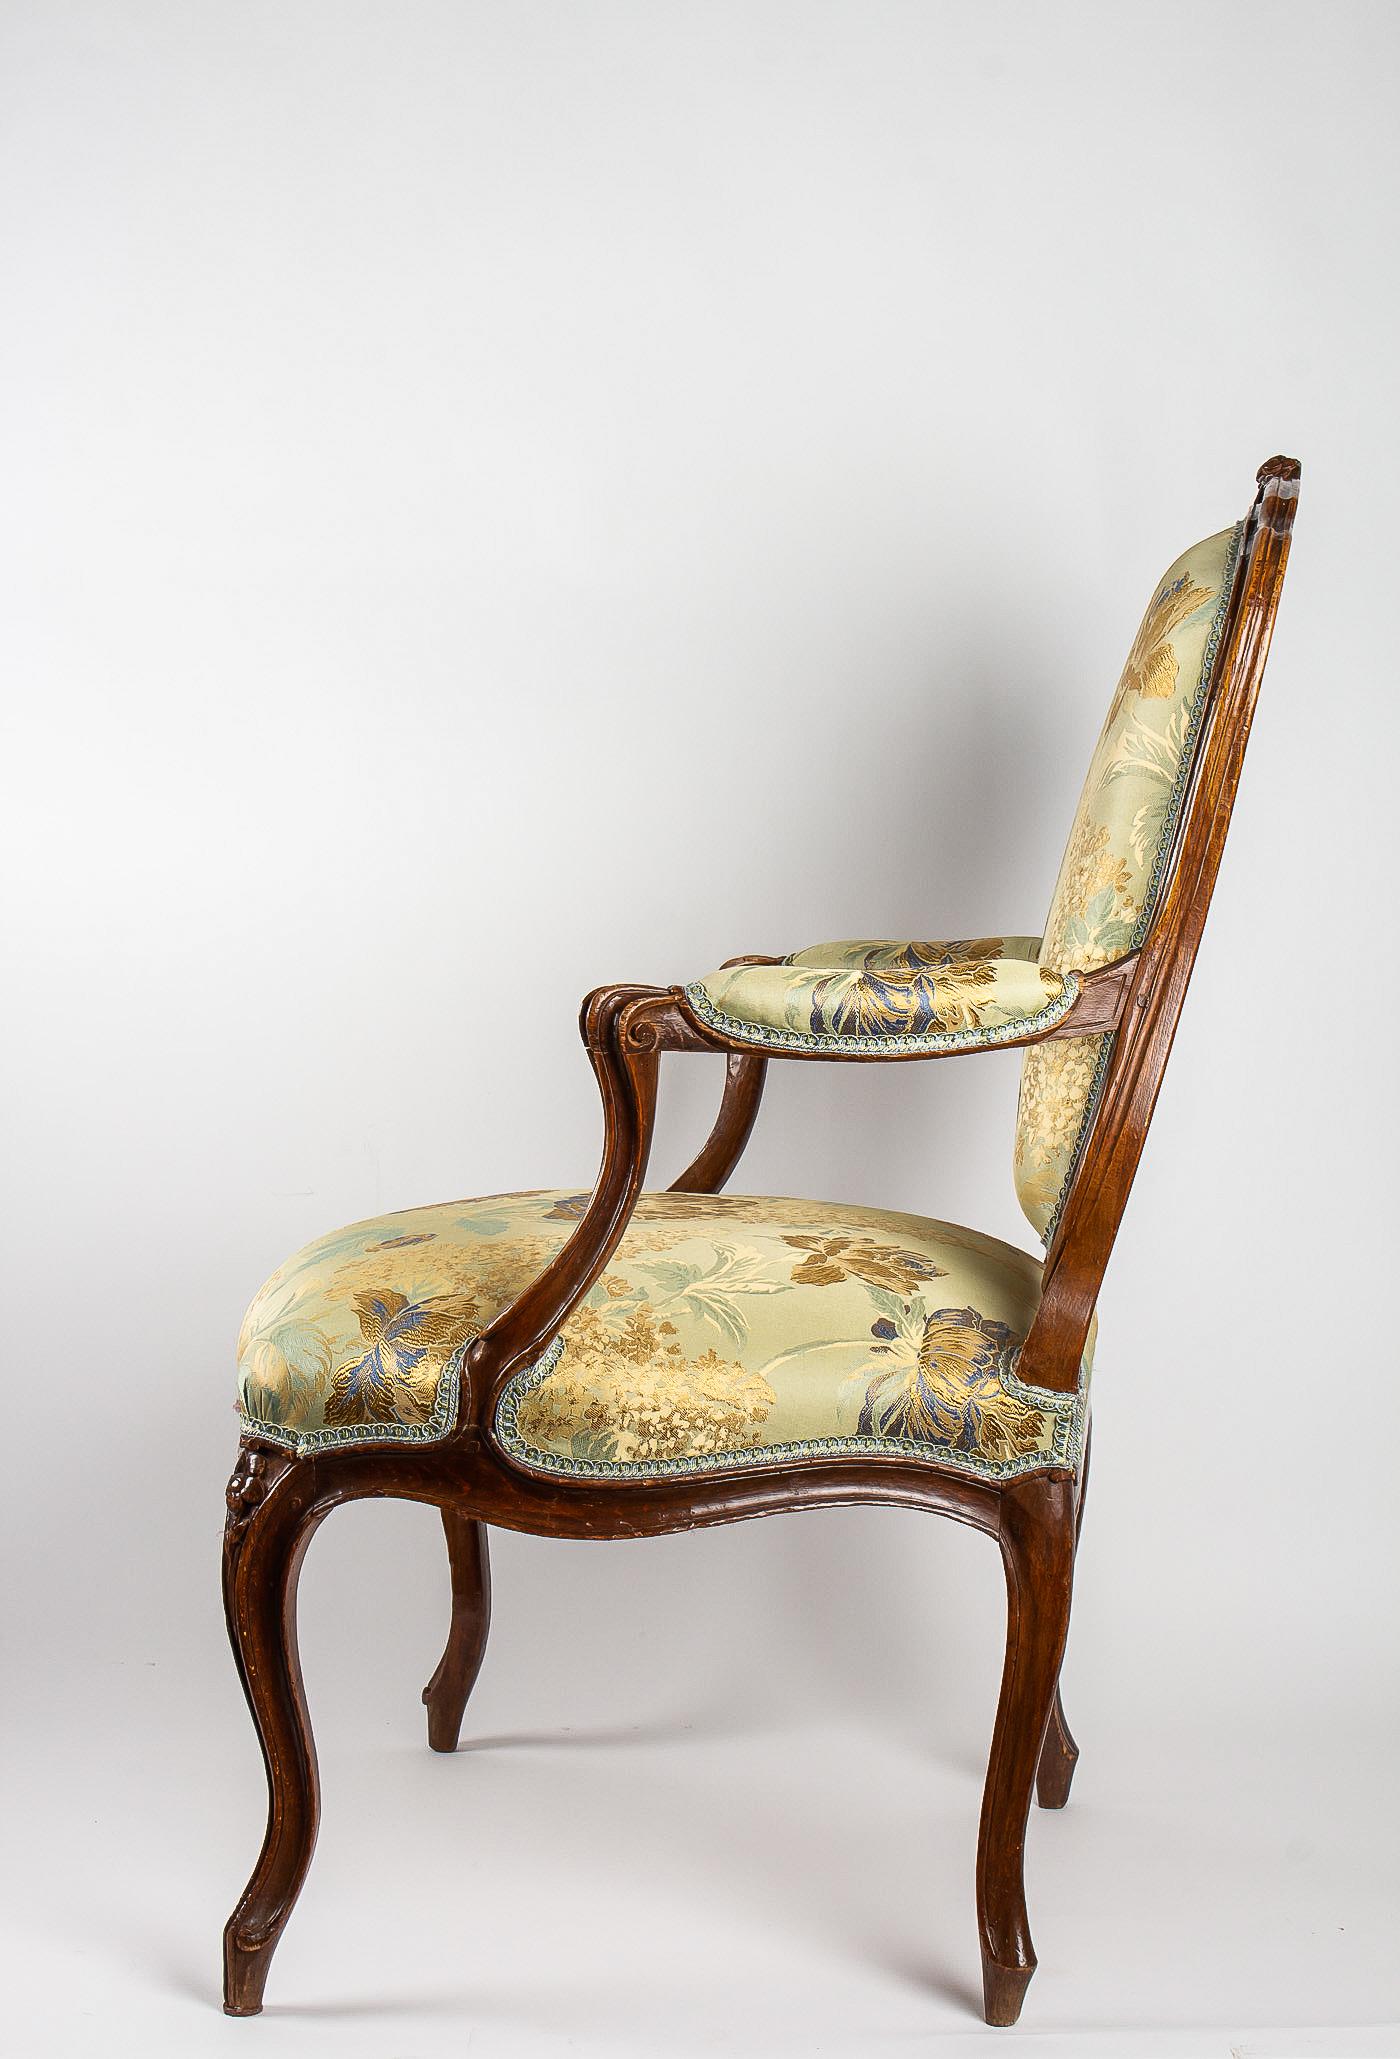 Louis XV Period Set of 4 of Large Armchairs, circa 1766-1770 by Louis Delanois 2